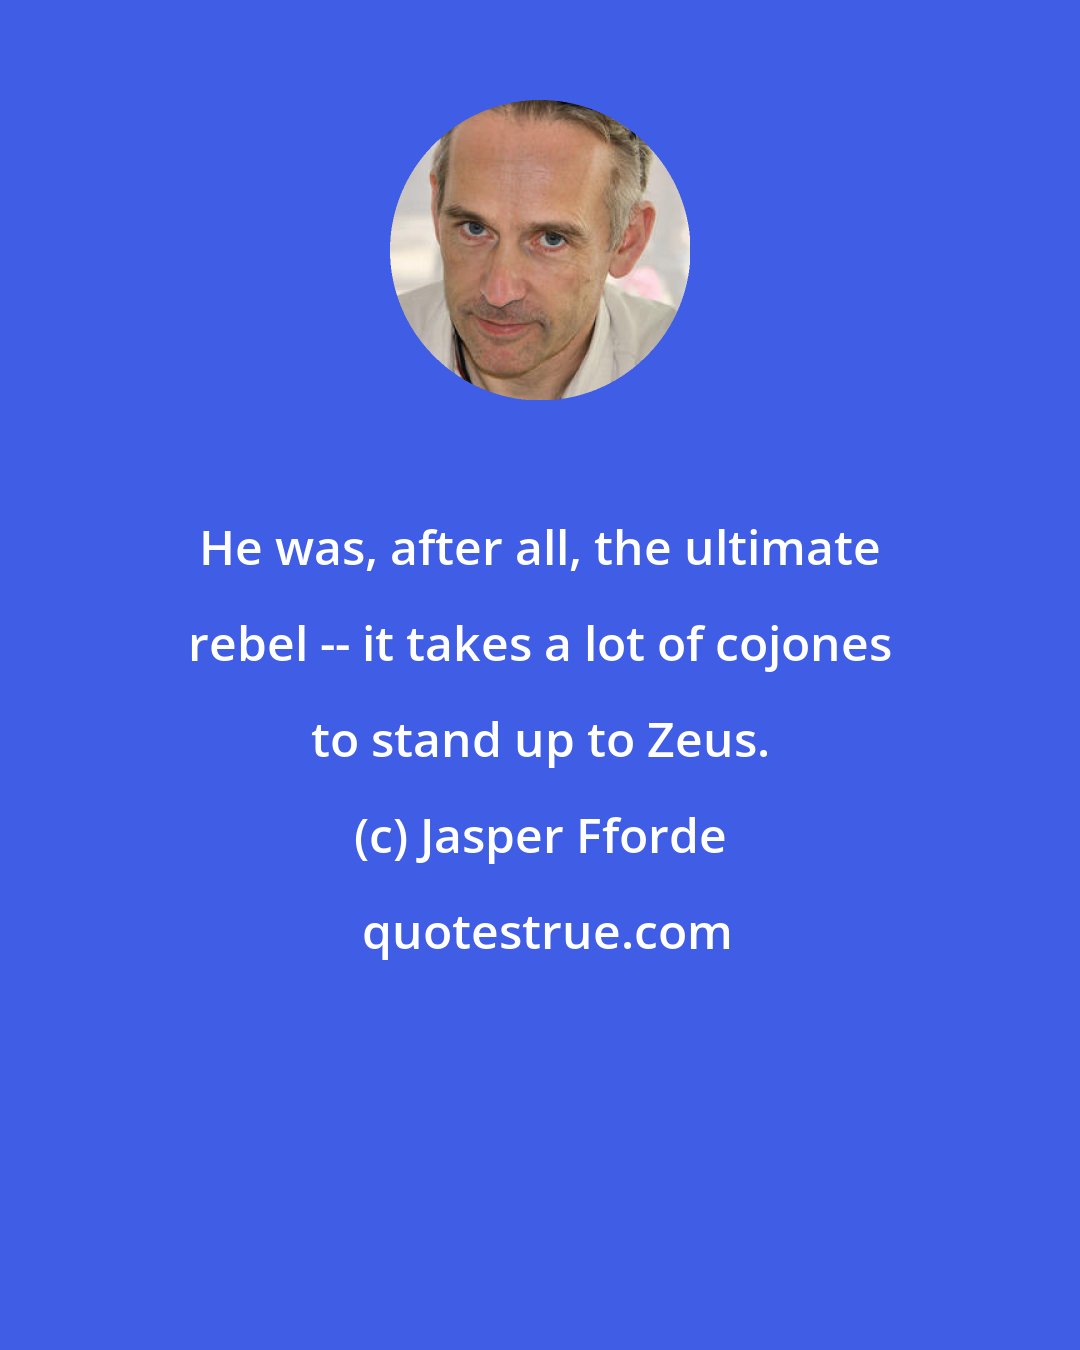 Jasper Fforde: He was, after all, the ultimate rebel -- it takes a lot of cojones to stand up to Zeus.